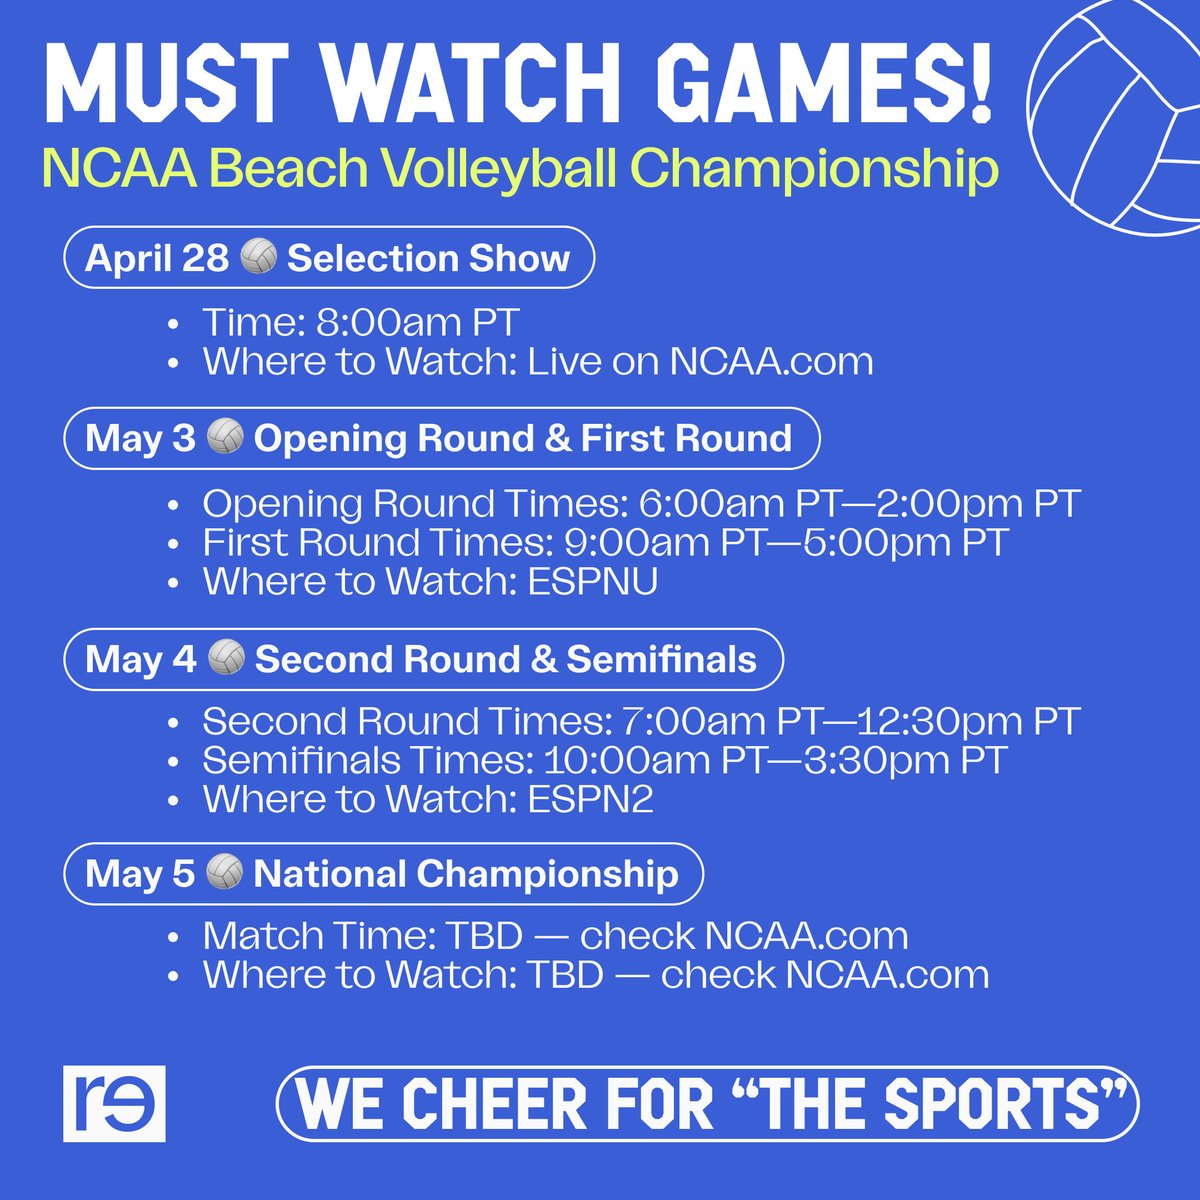 Let's rally for @NCAAVolleyball 🏐 Here's how to tune into the NCAA Beach Volleyball Championship this week! When we watch the game, we change the game 👏 Never watch alone: Join your fellow Reimaginers in the game-day chat on RE—space!